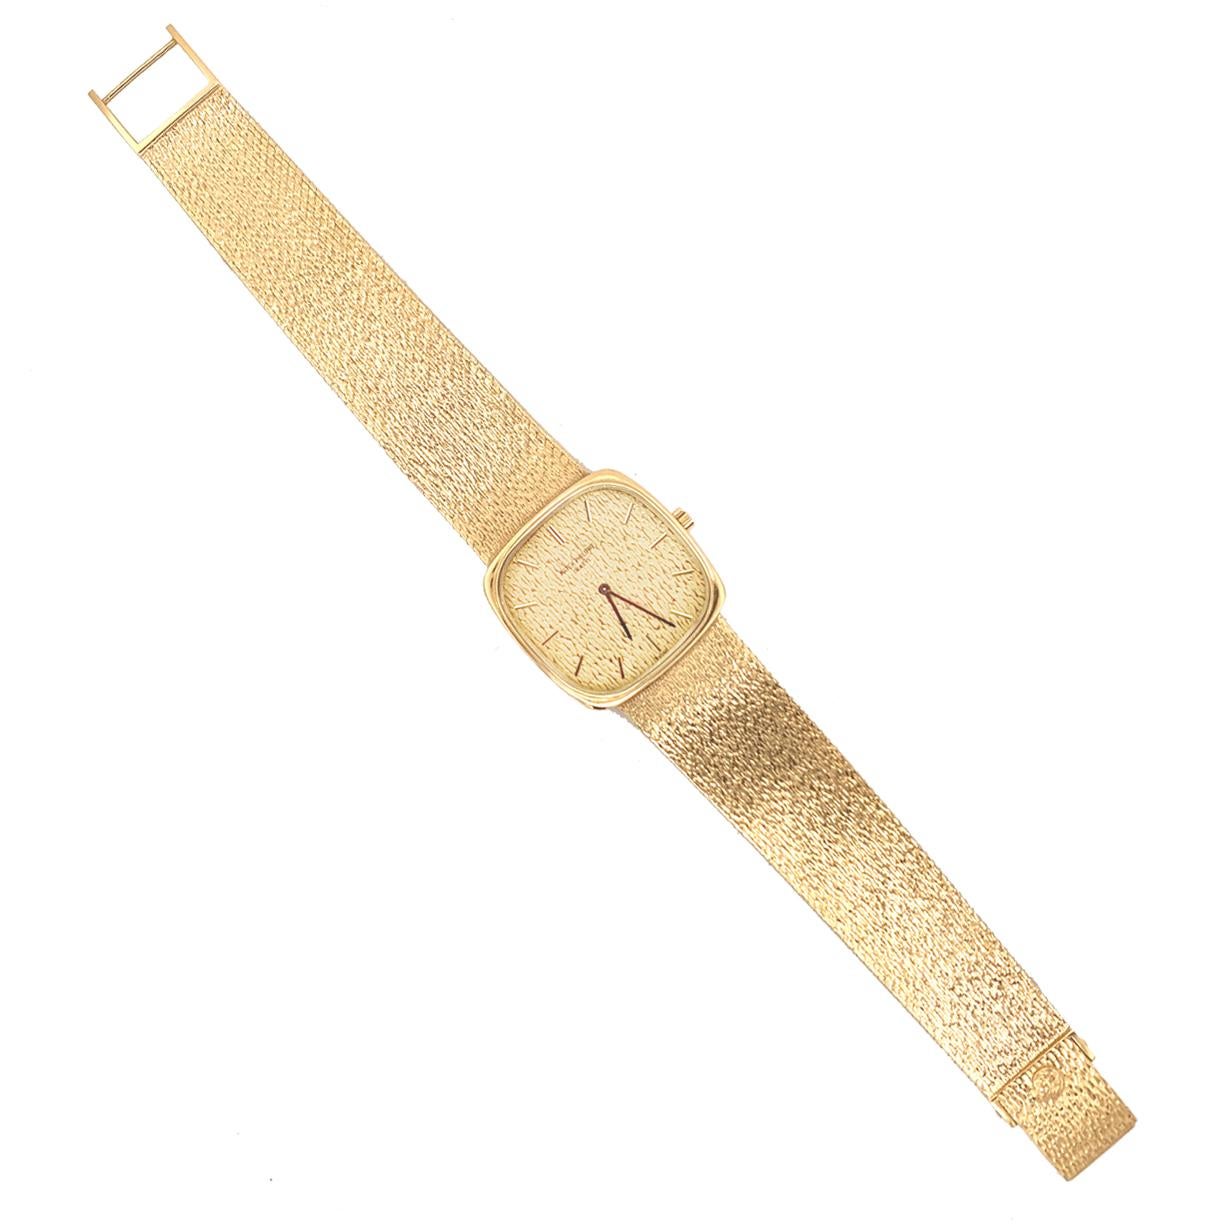 Beautiful wristwatch:  PATEK PHILIPPE slim cushion wristwatch with integral mesh bracelet.  18K textured yellow gold.  Softened edge square case, approximately 28mm x 28mm.  7